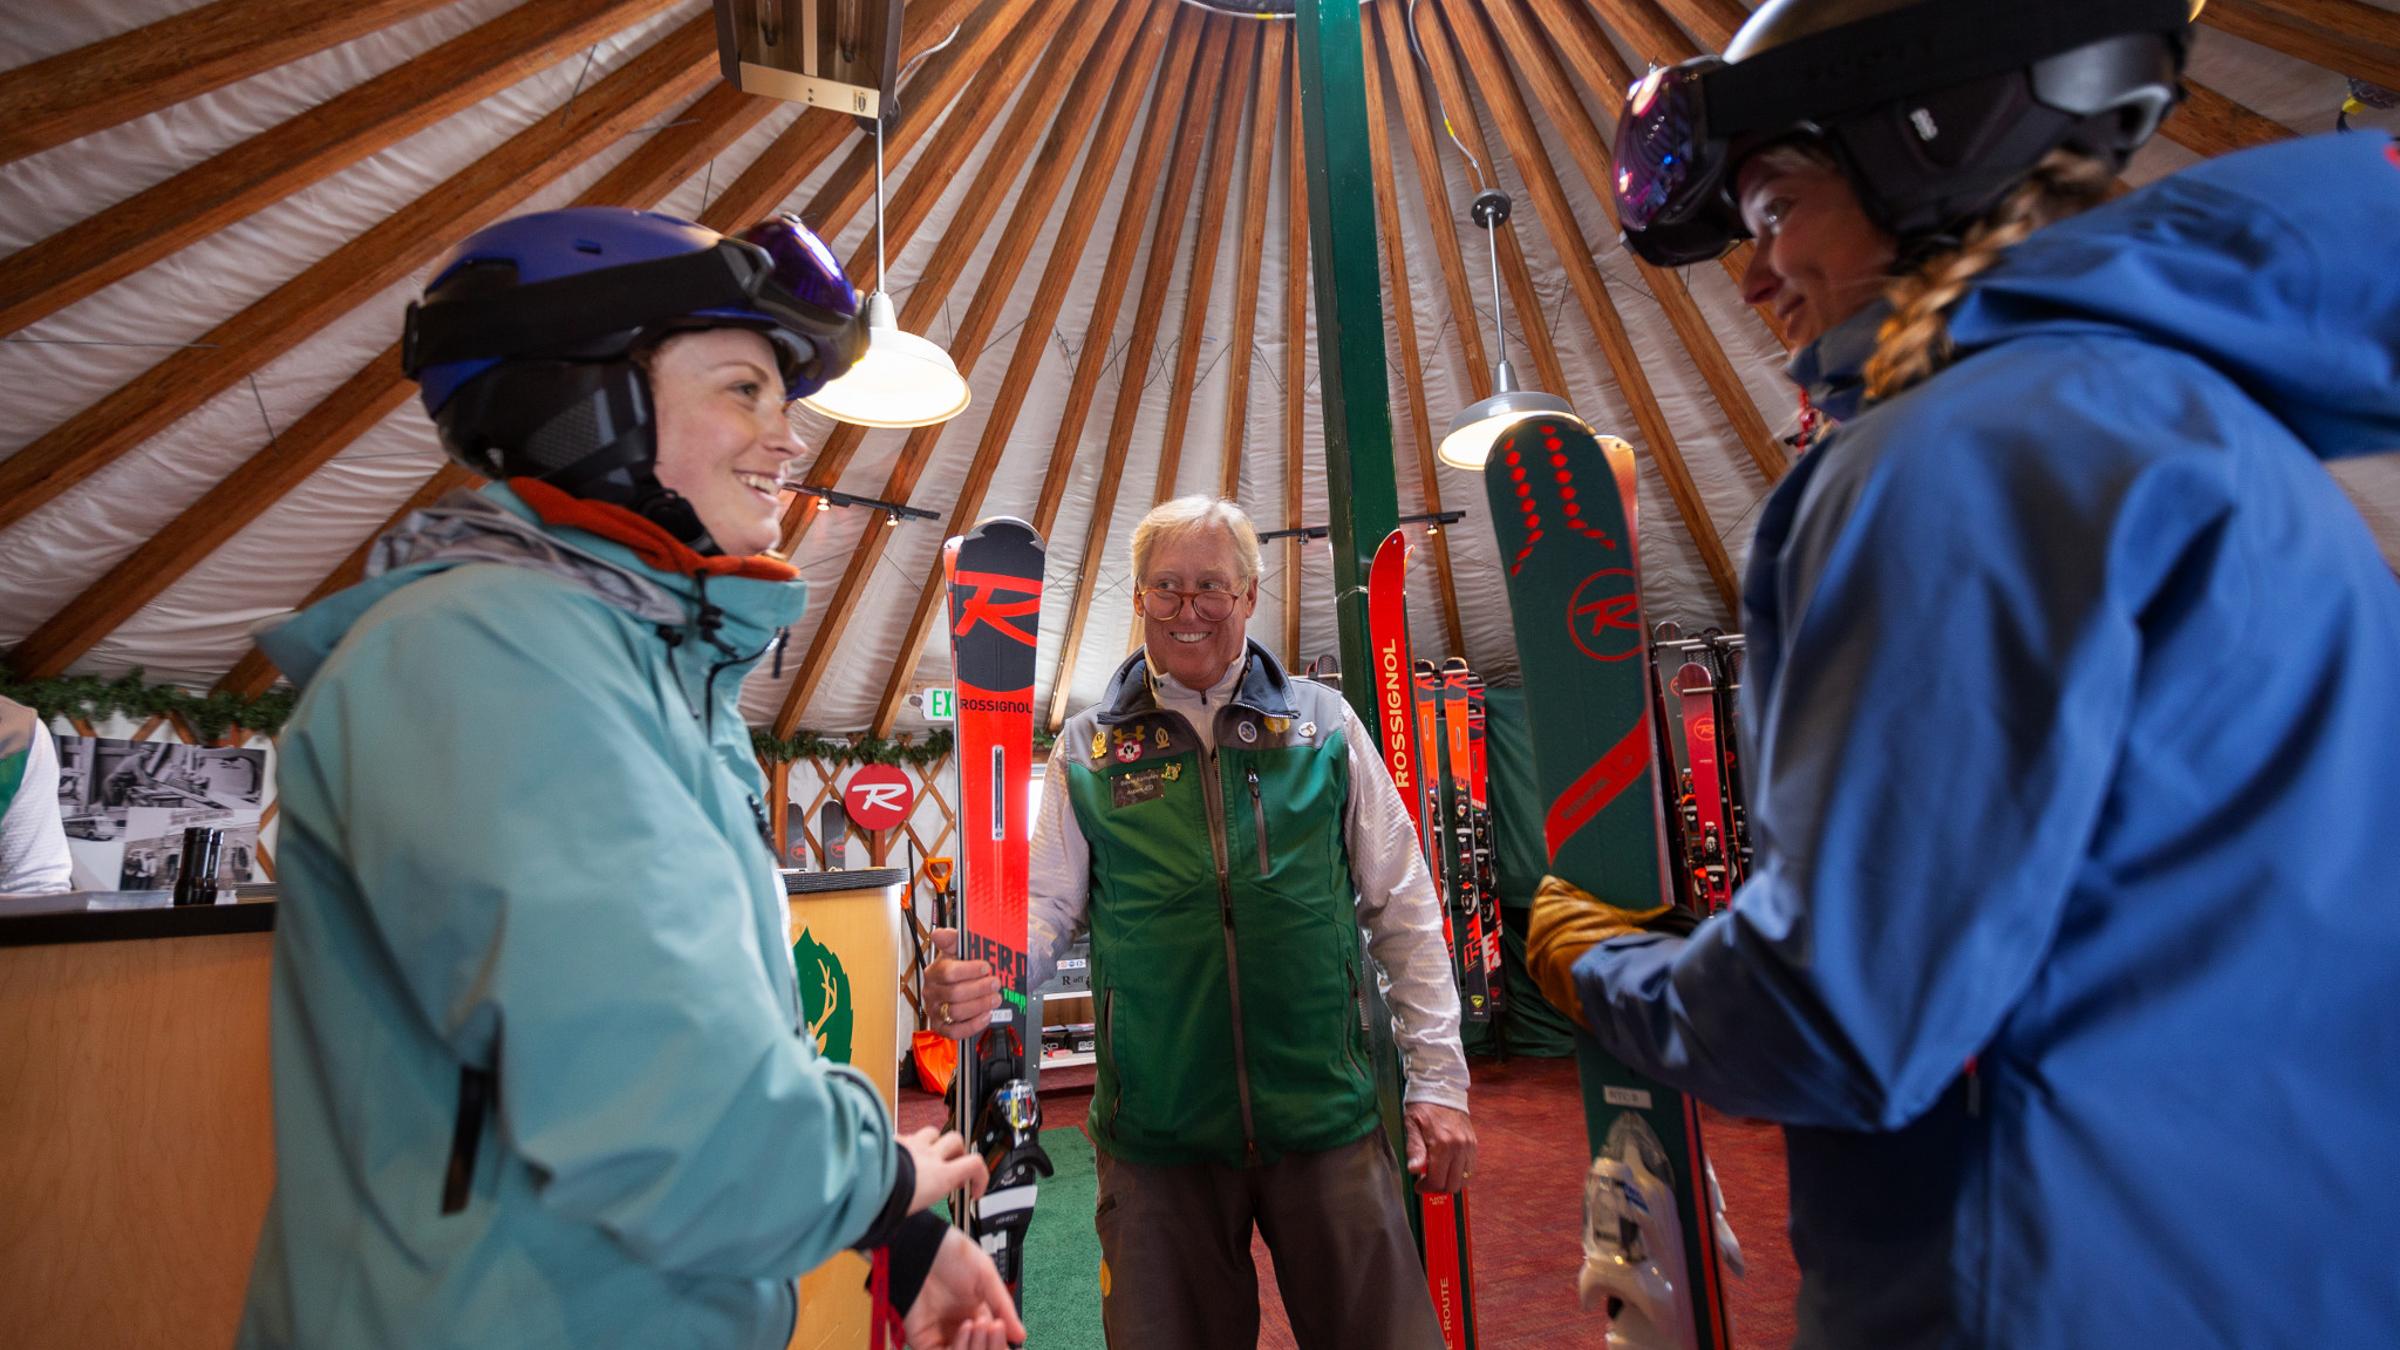 Two guests getting skis at the Rossignol Test Yurt